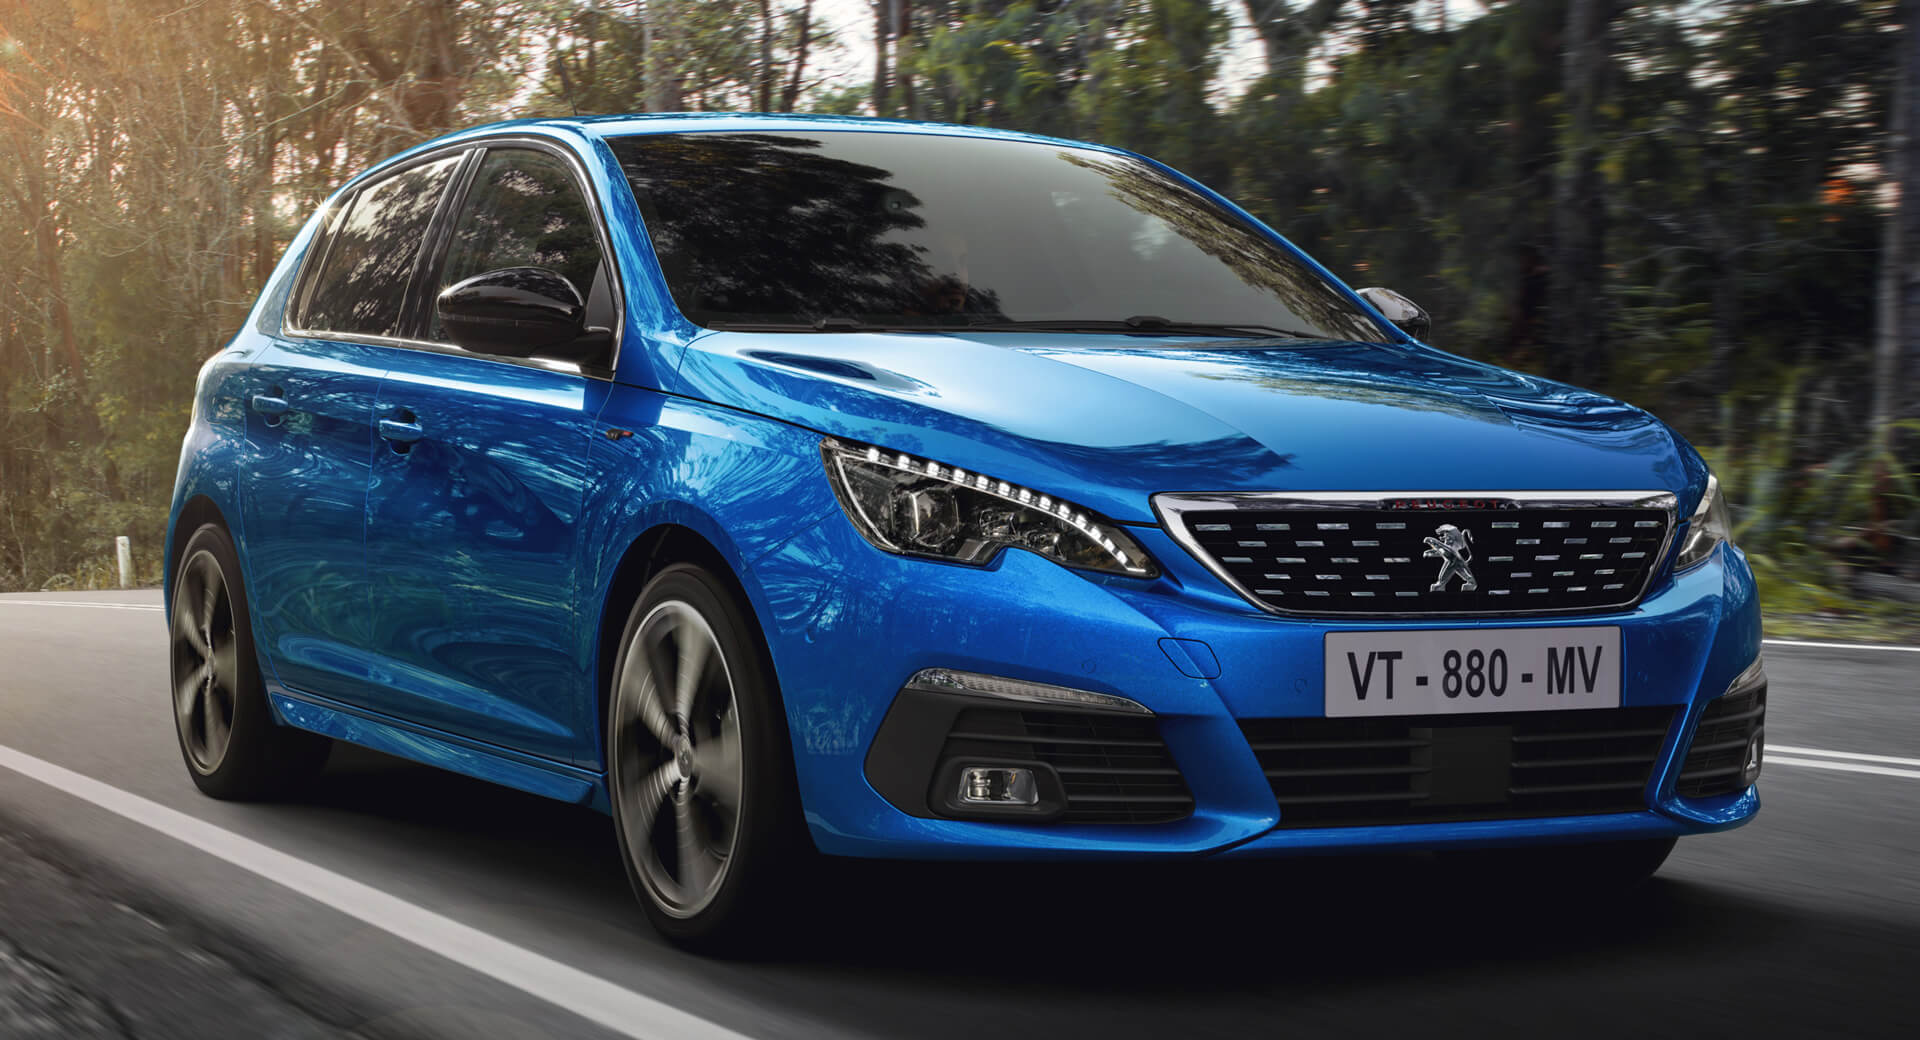 2021 Peugeot 308 Breaks Cover With Digital iCockpit, Not